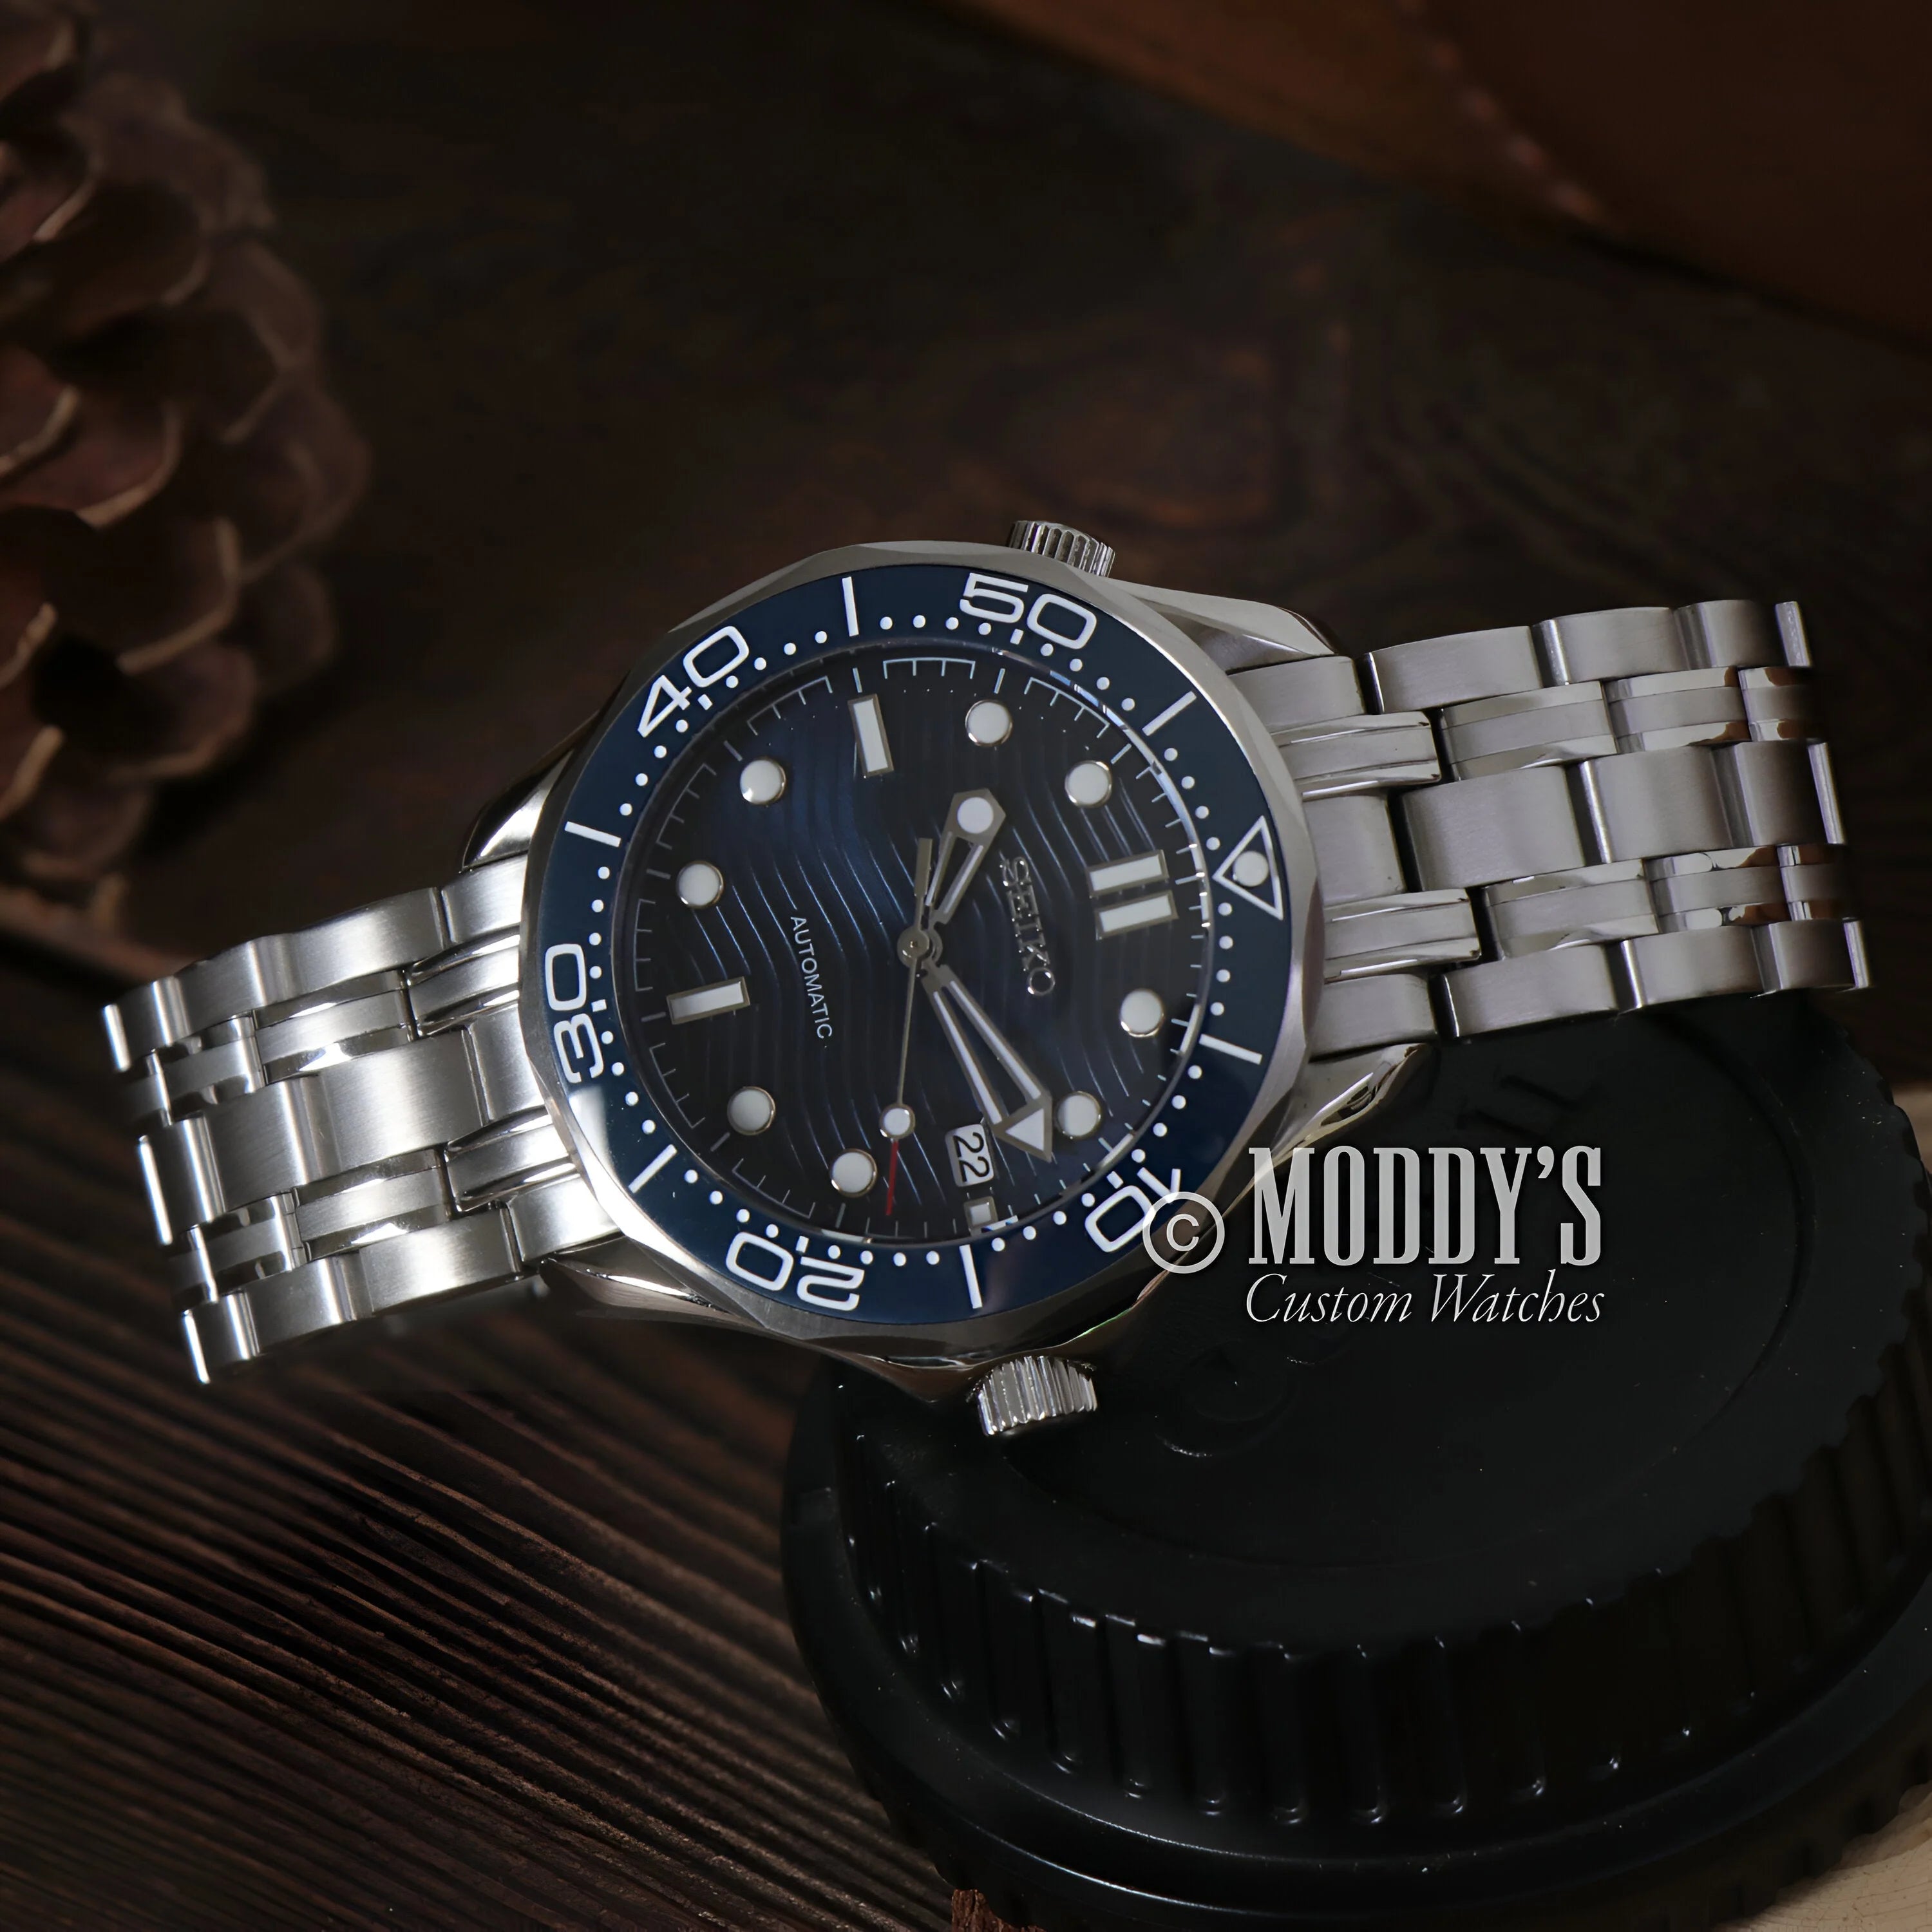 Seiko Mod Seamaster Blue: Stainless Steel Dive Watch With Blue Dial And Bezel On Dark Surface